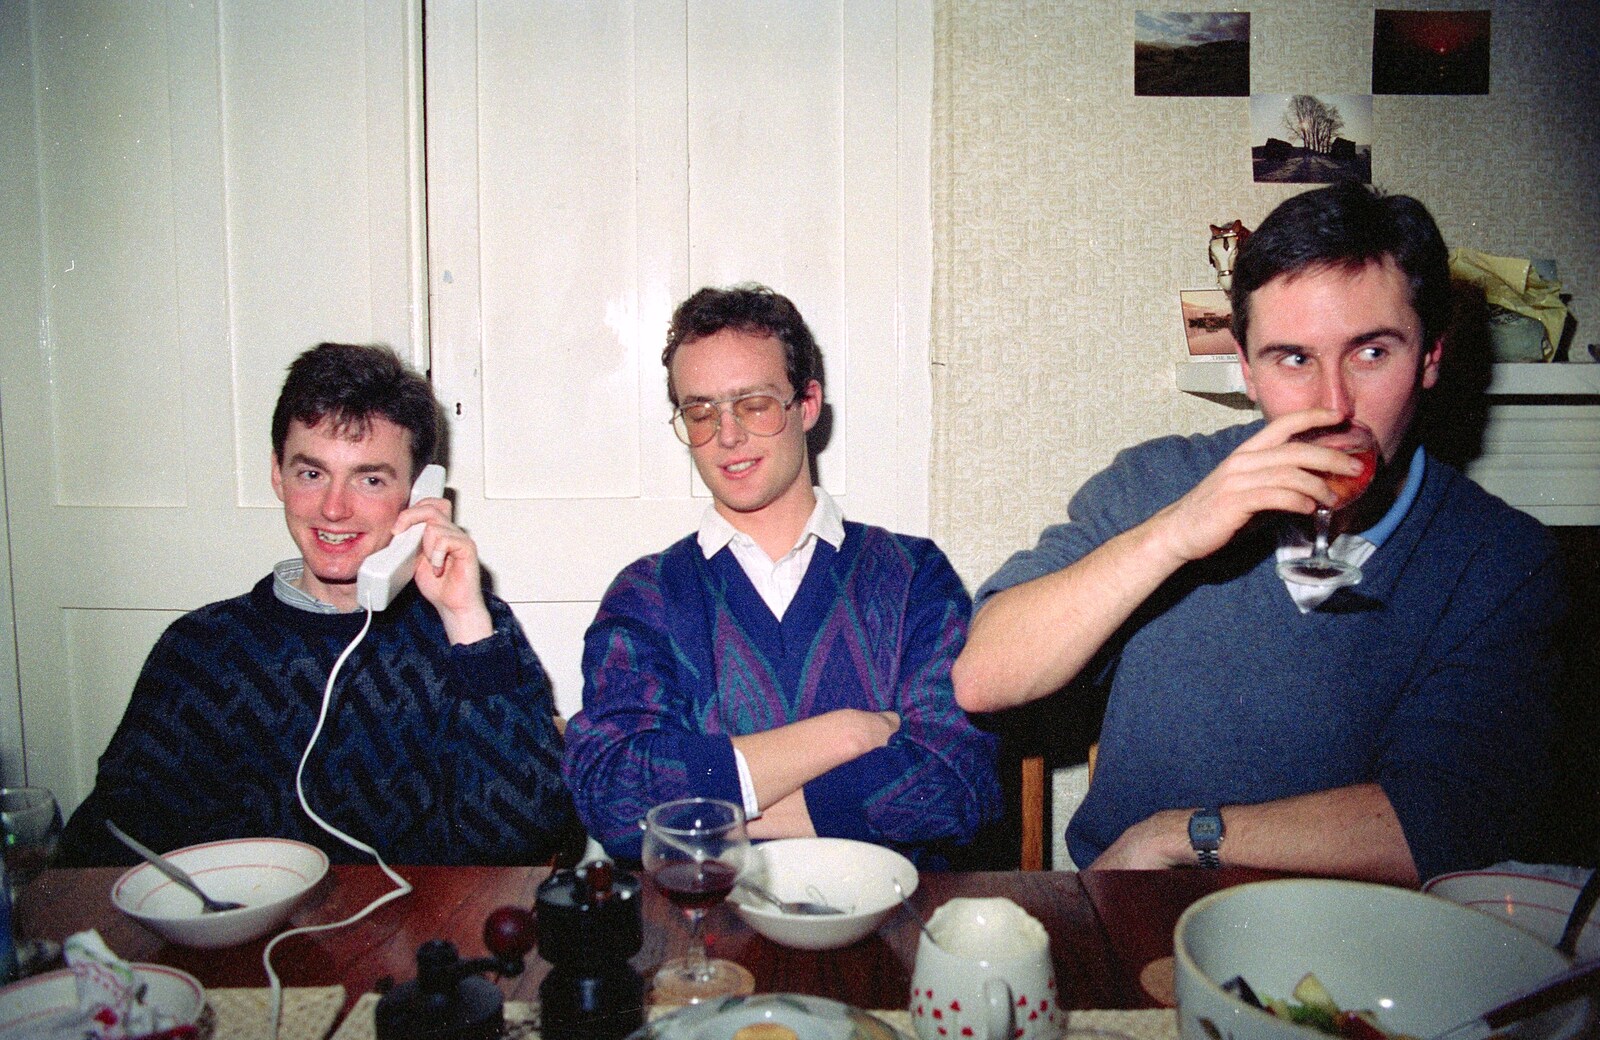 John's on the phone from Uni: A Dinner Party, Harbertonford and Buckfastleigh, Devon - 24th December 1988